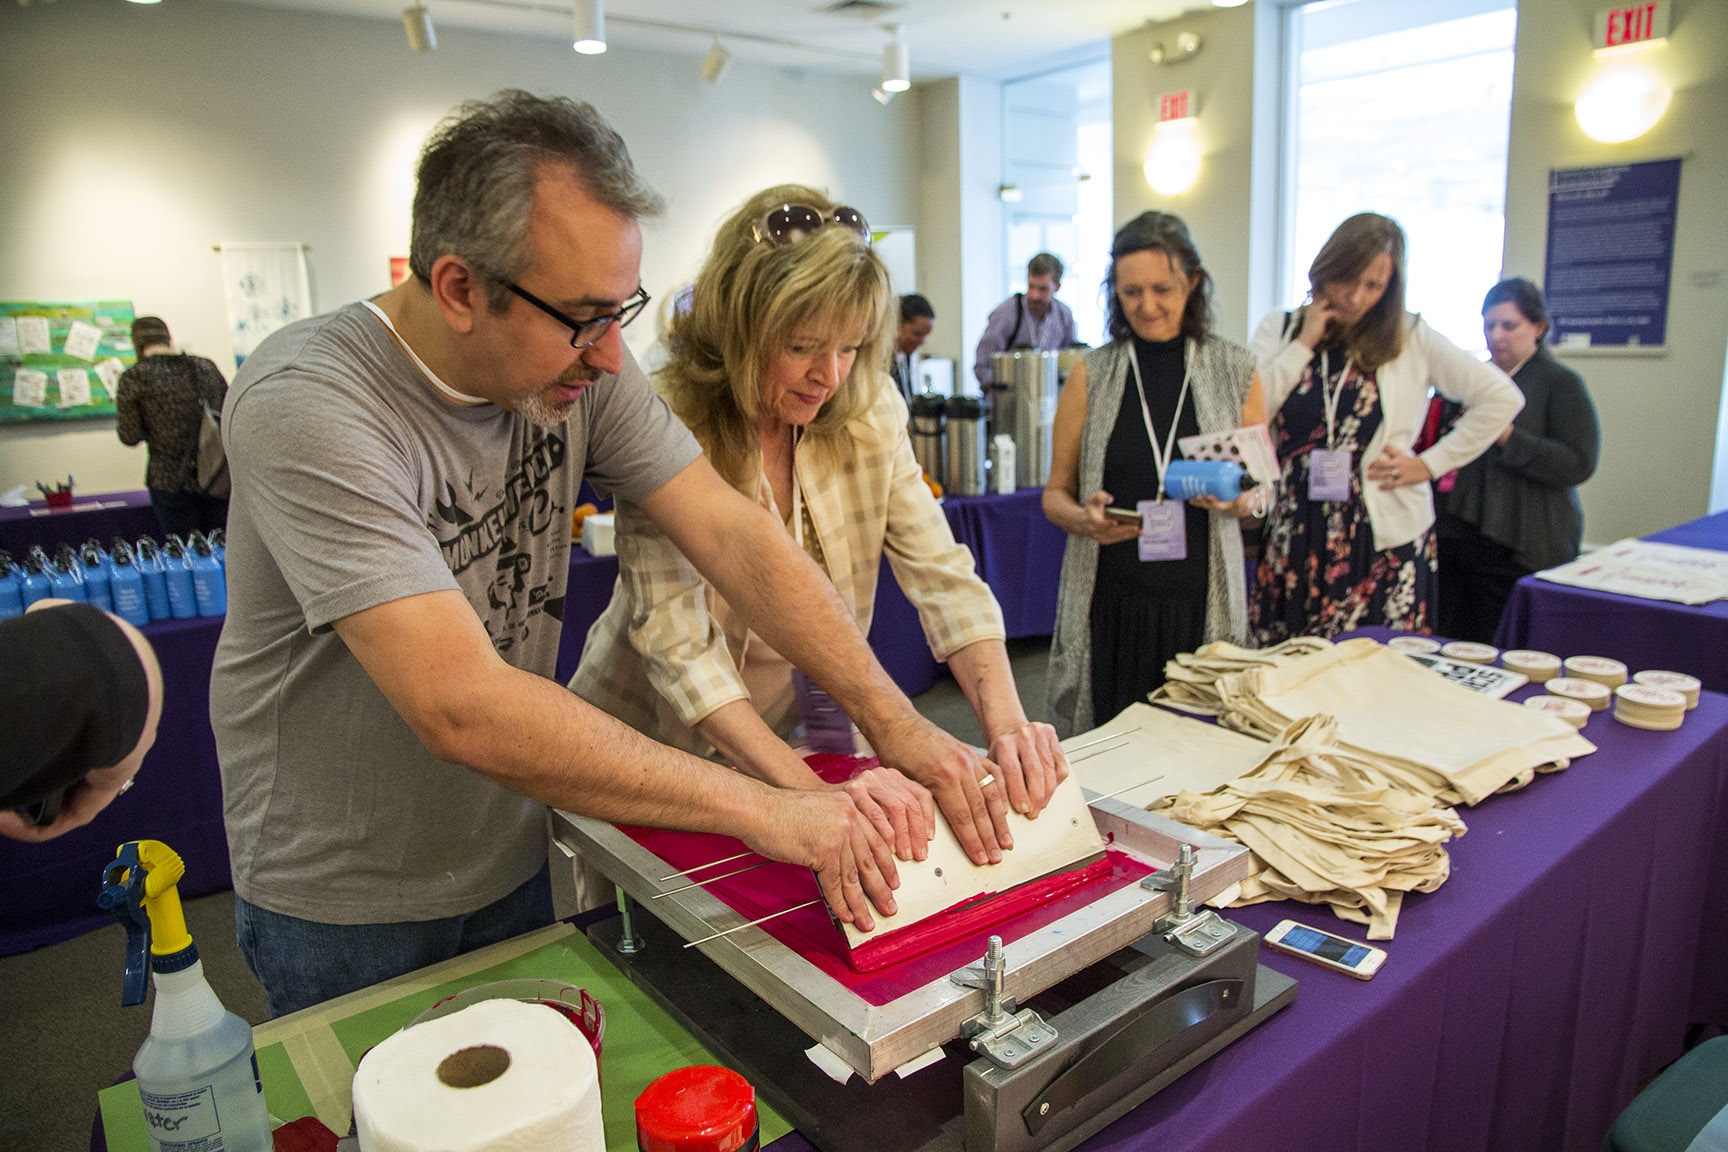 Man helps woman create a screen print on a tote bag during a break at a conference